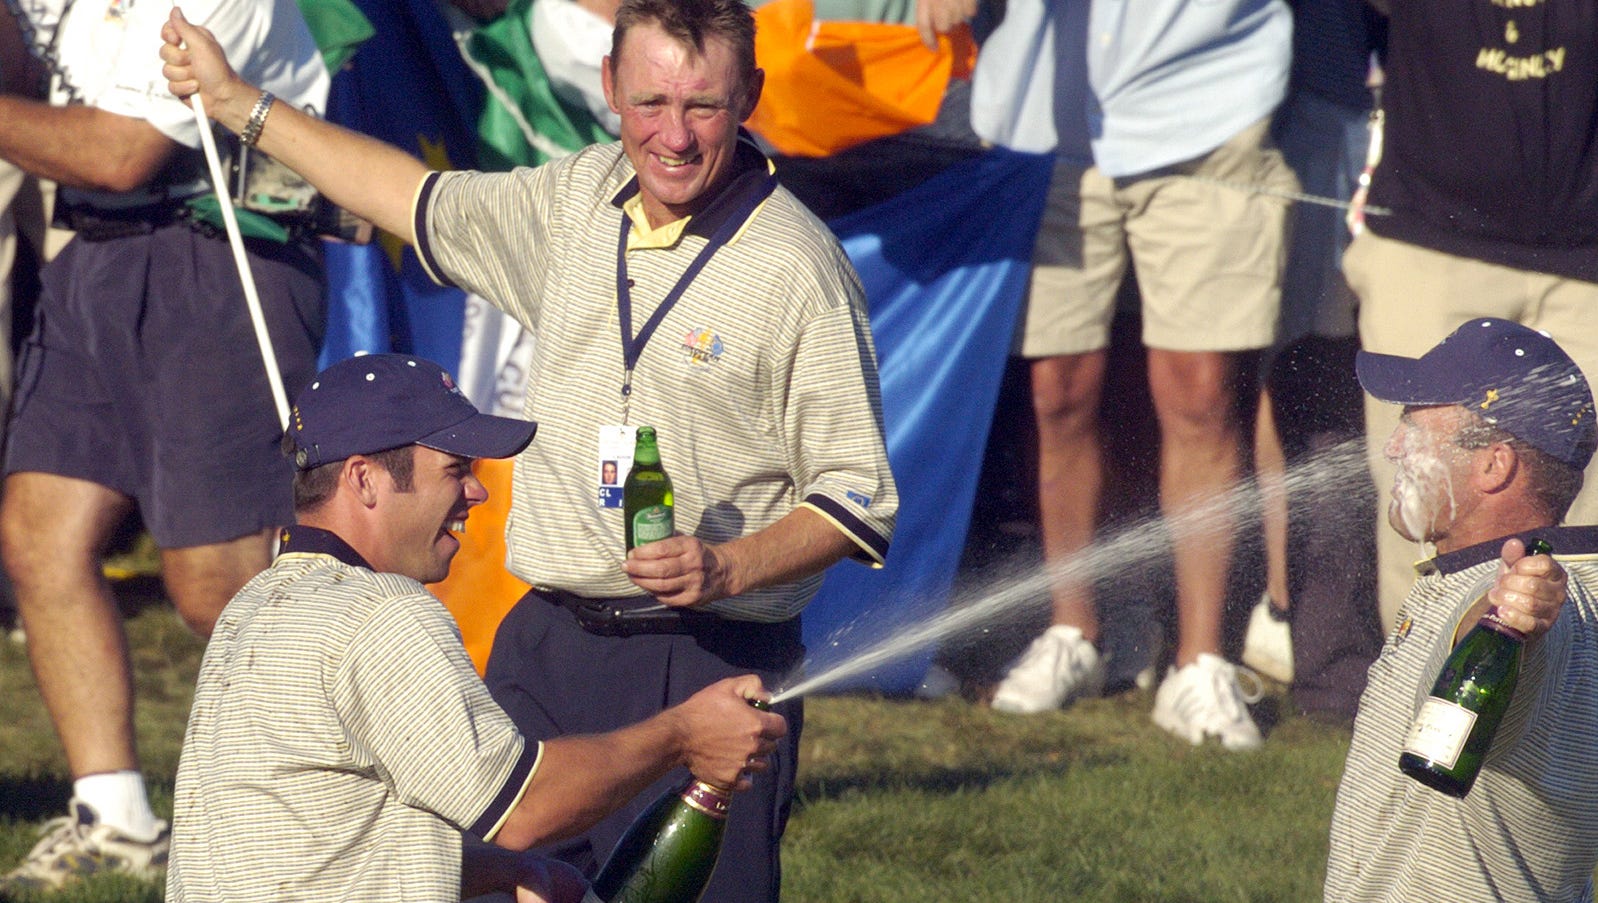 Team Europe's Paul Casey sprays Thomas Levet with champagne on the 18th hole after winning the 2004 Ryder Cup.